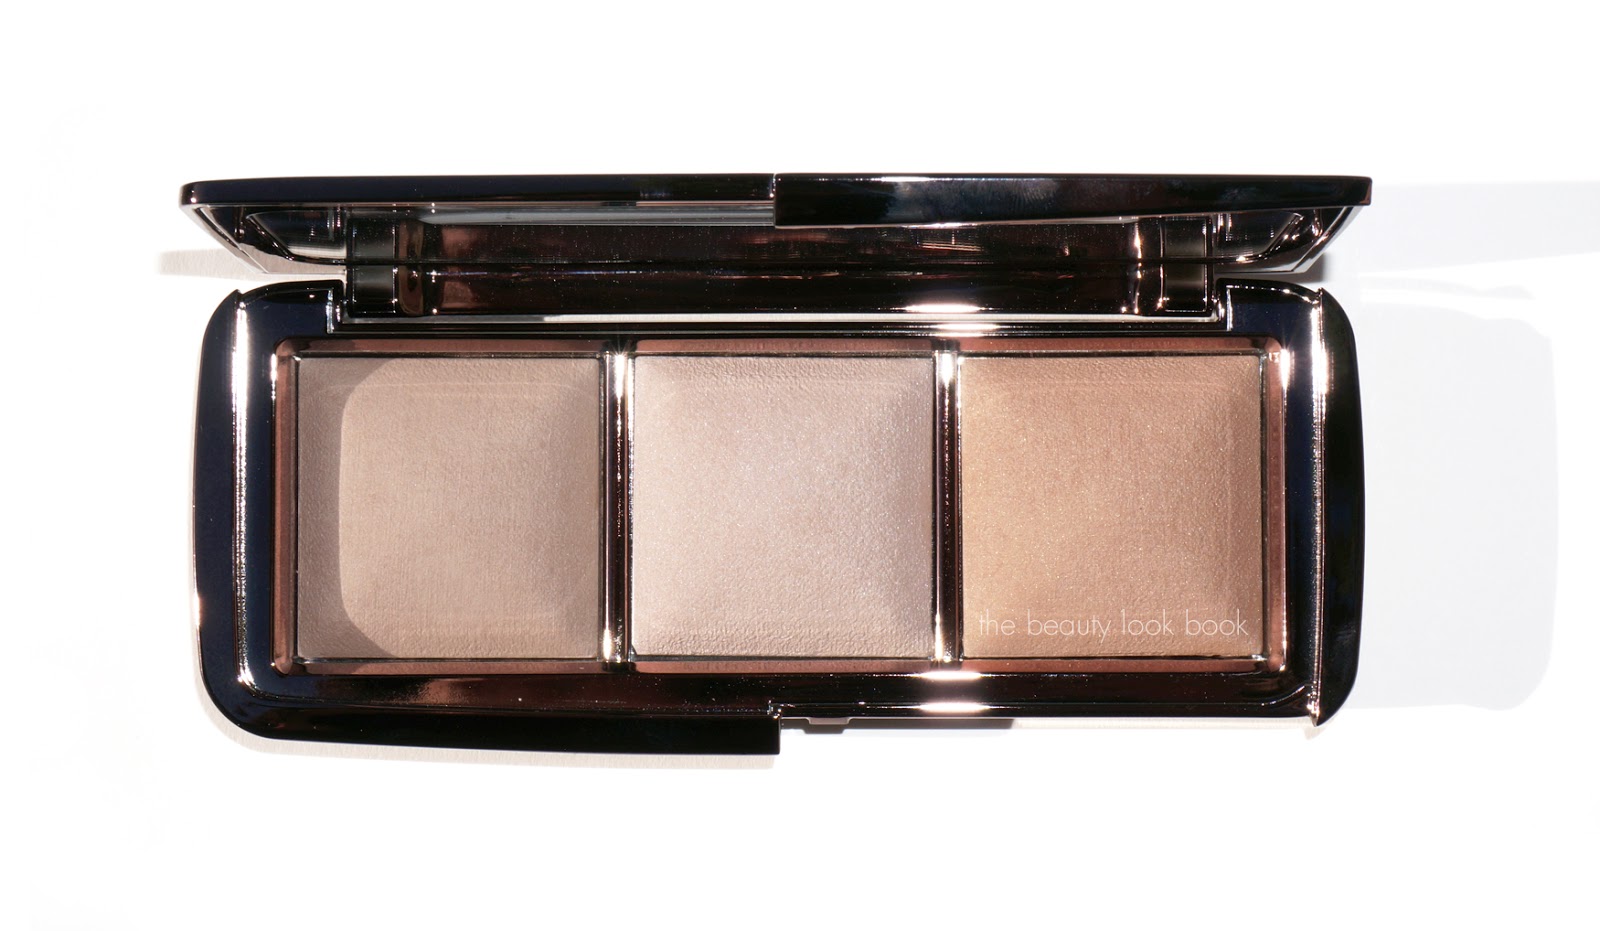 Chanel Accent #84 Powder Blush  Holiday 2013 - The Beauty Look Book